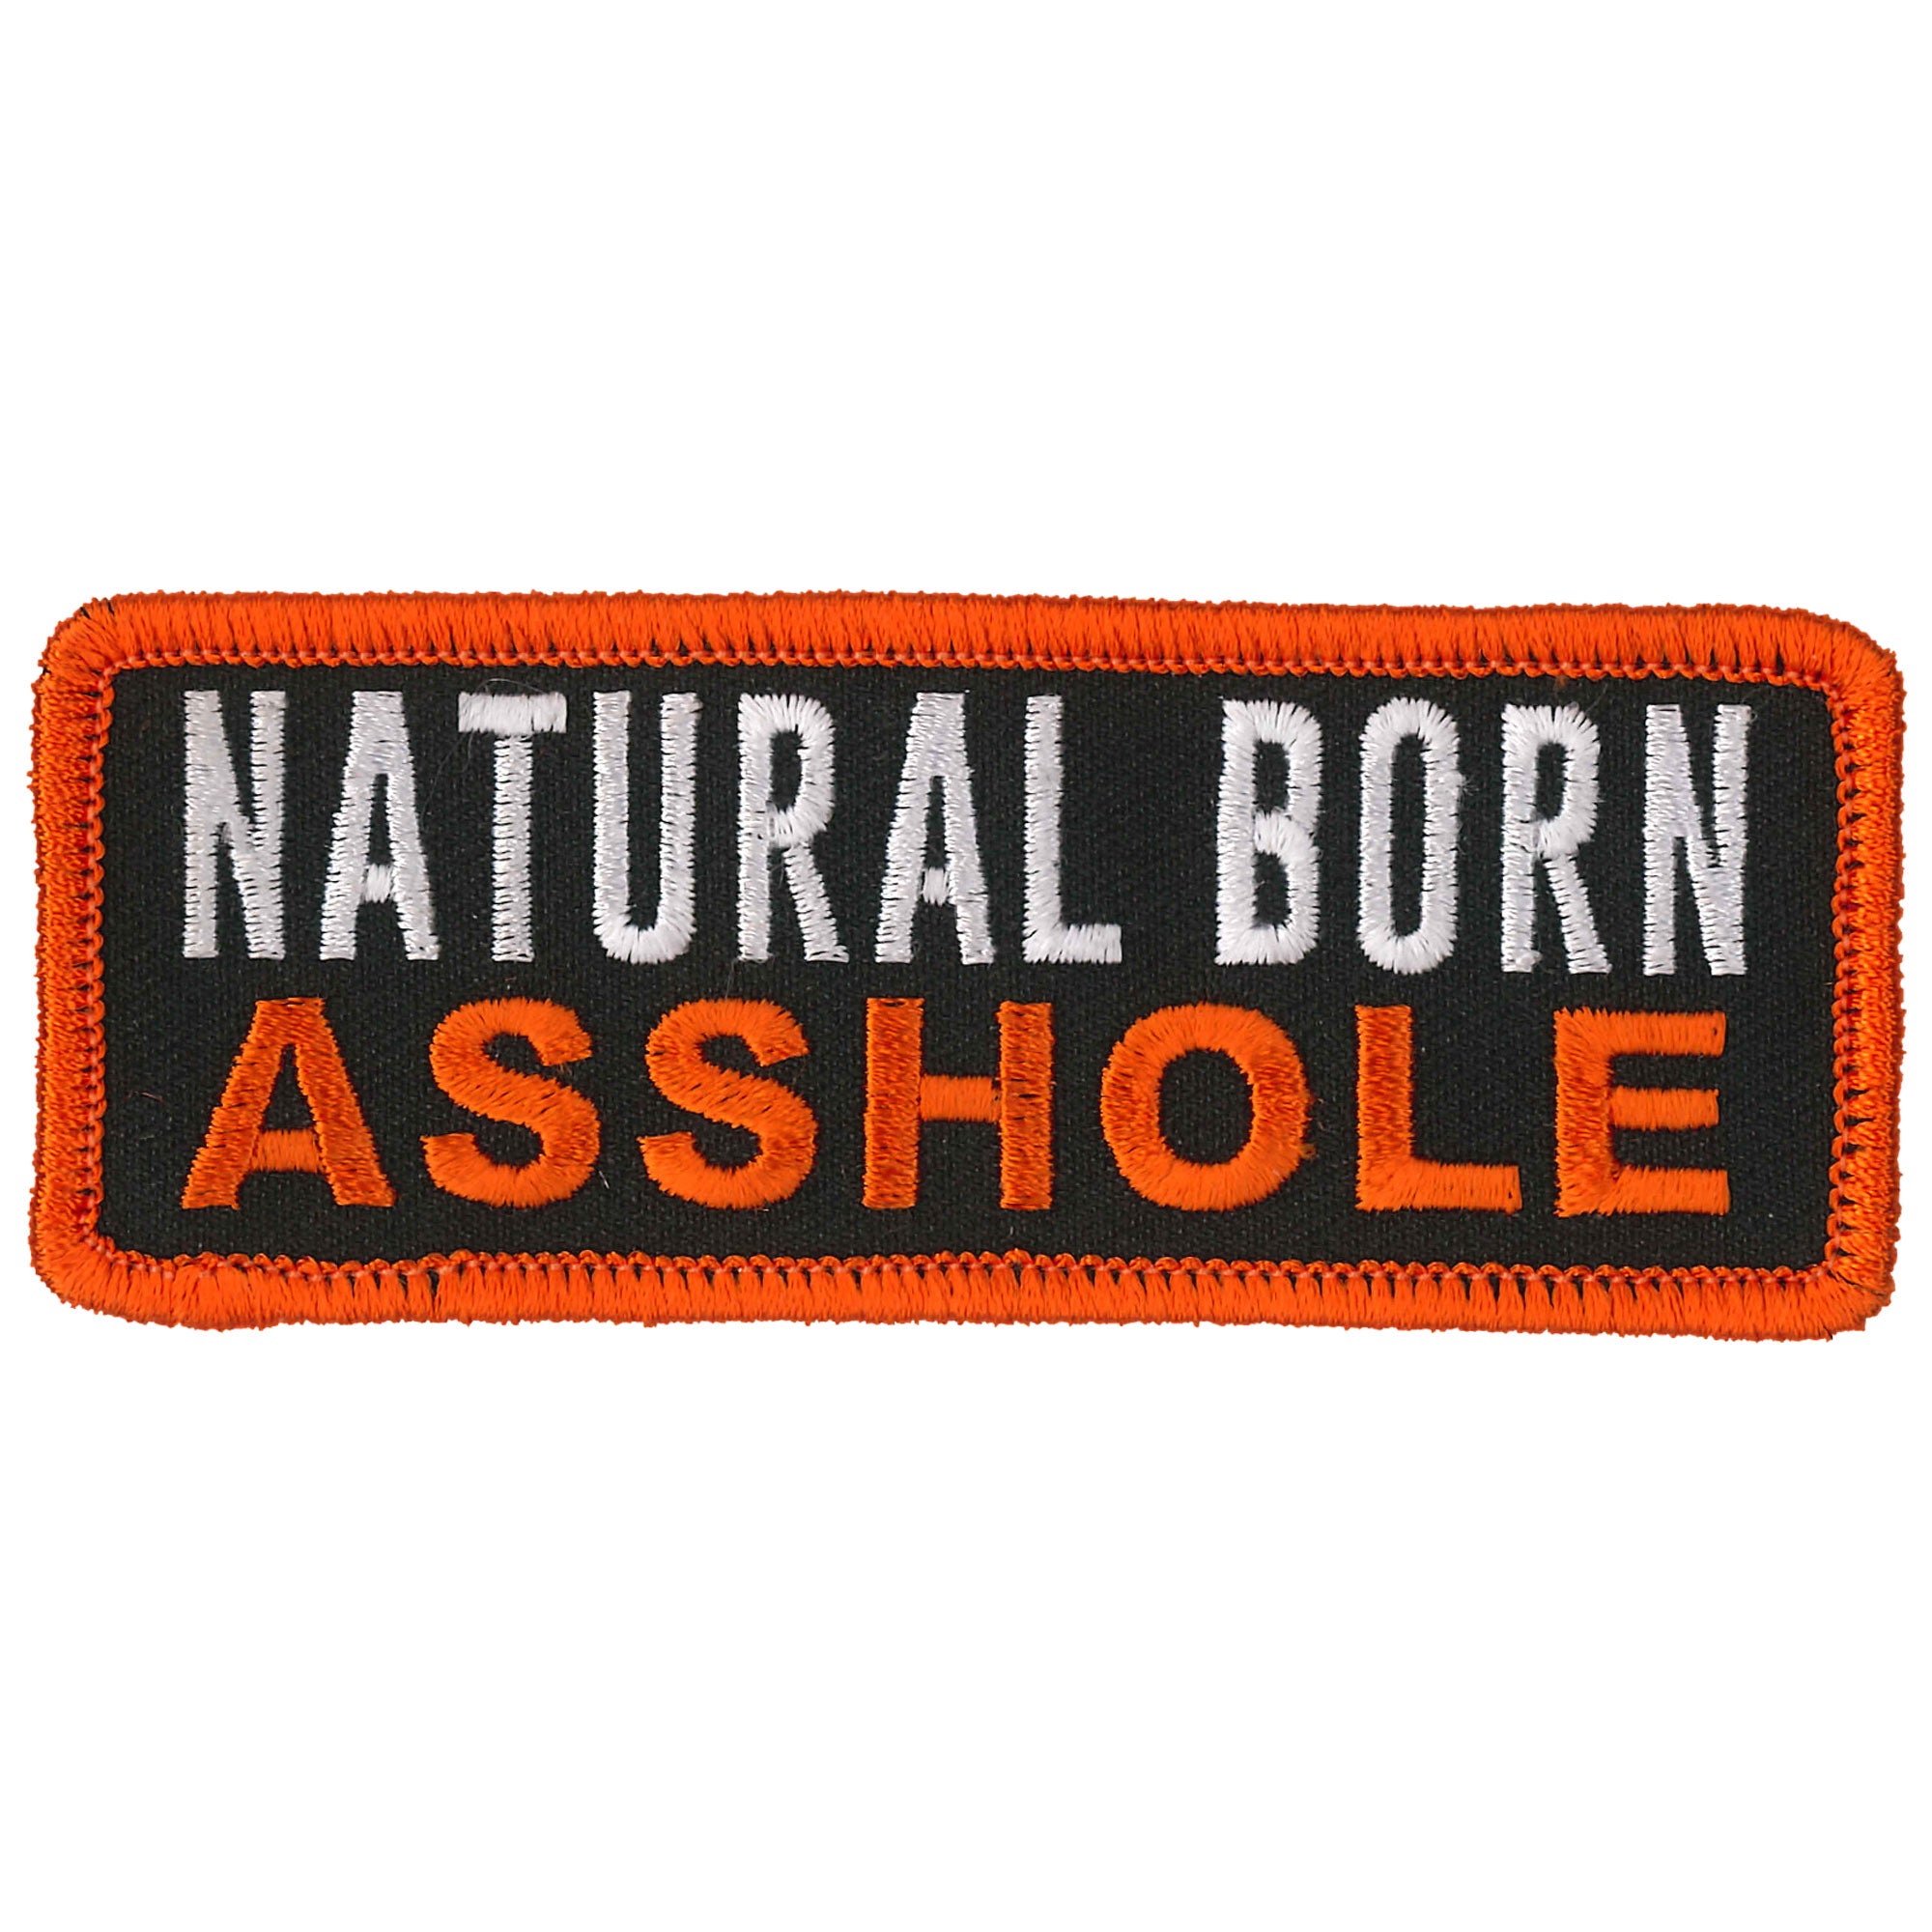 Hot Leathers Natural Born Asshole 4" x 2" Patch